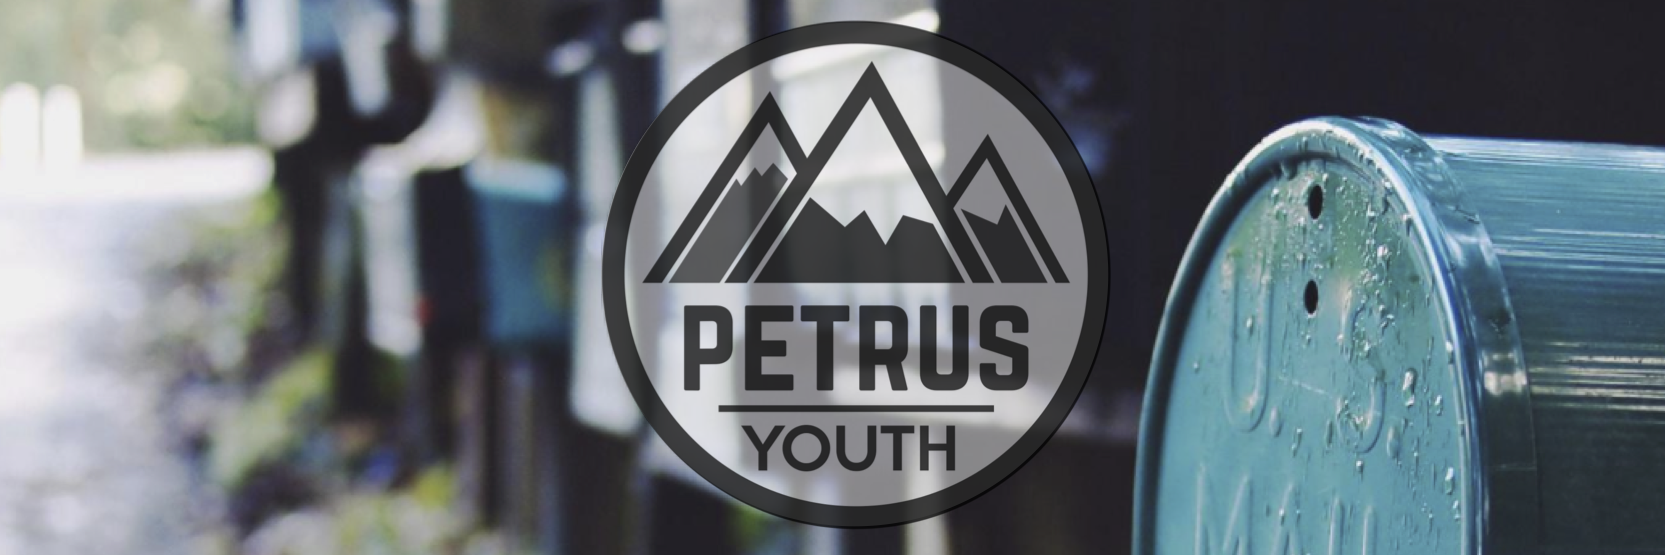 Petrus Youth